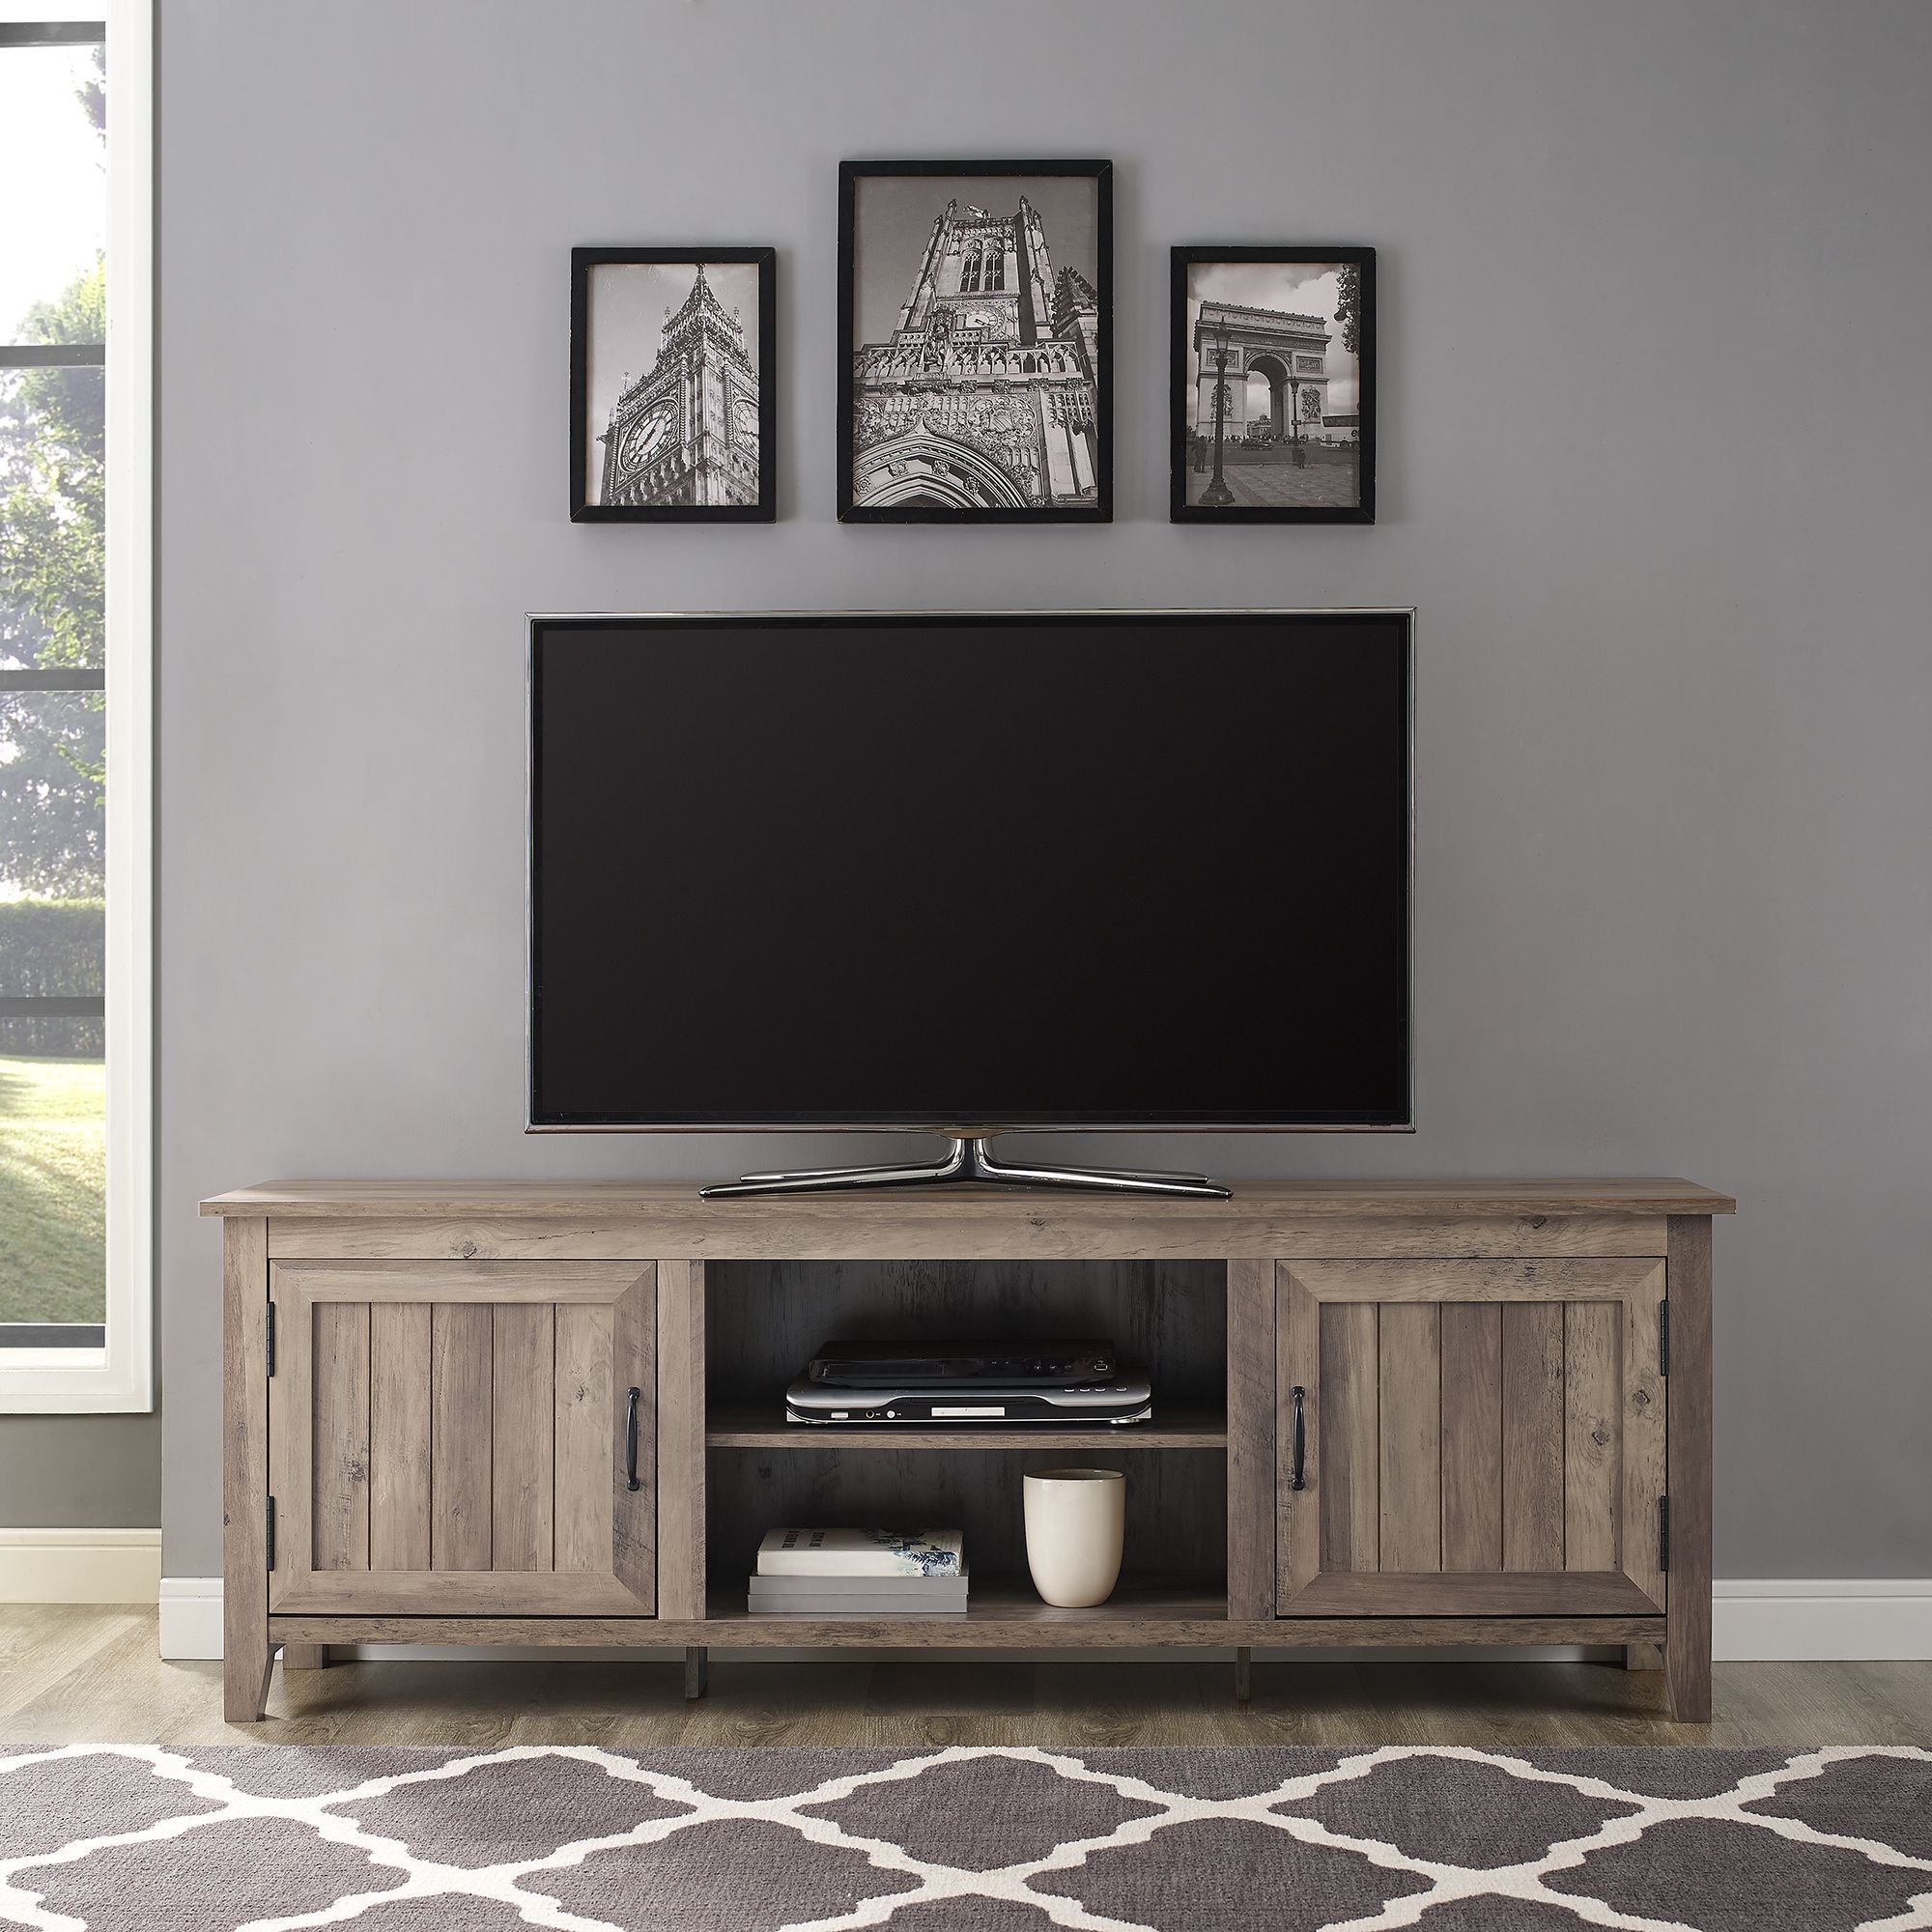 Woven Paths Farmhouse Grooved Door Tv Stand For Tvs Up To With Regard To Woven Paths Barn Door Tv Stands In Multiple Finishes (View 4 of 15)